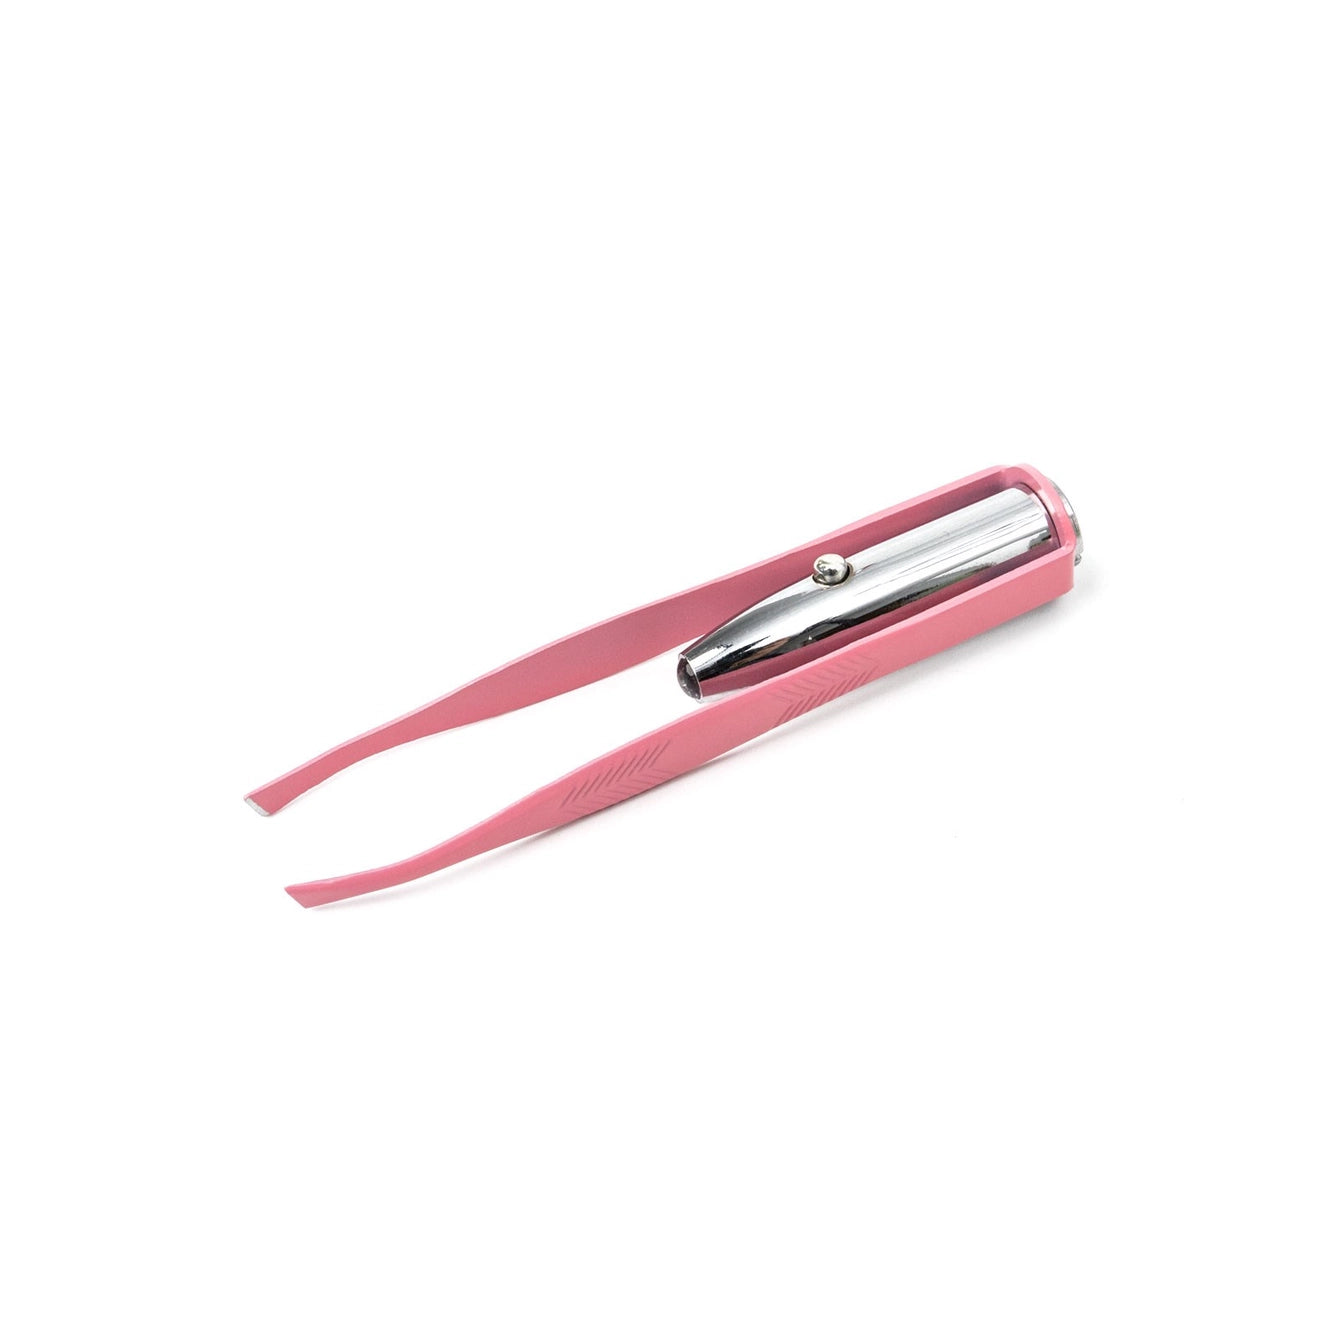 Precision grip tweezers t Targeted LED beam Easy & precise grooming Push button on/off Batteries included apricot color